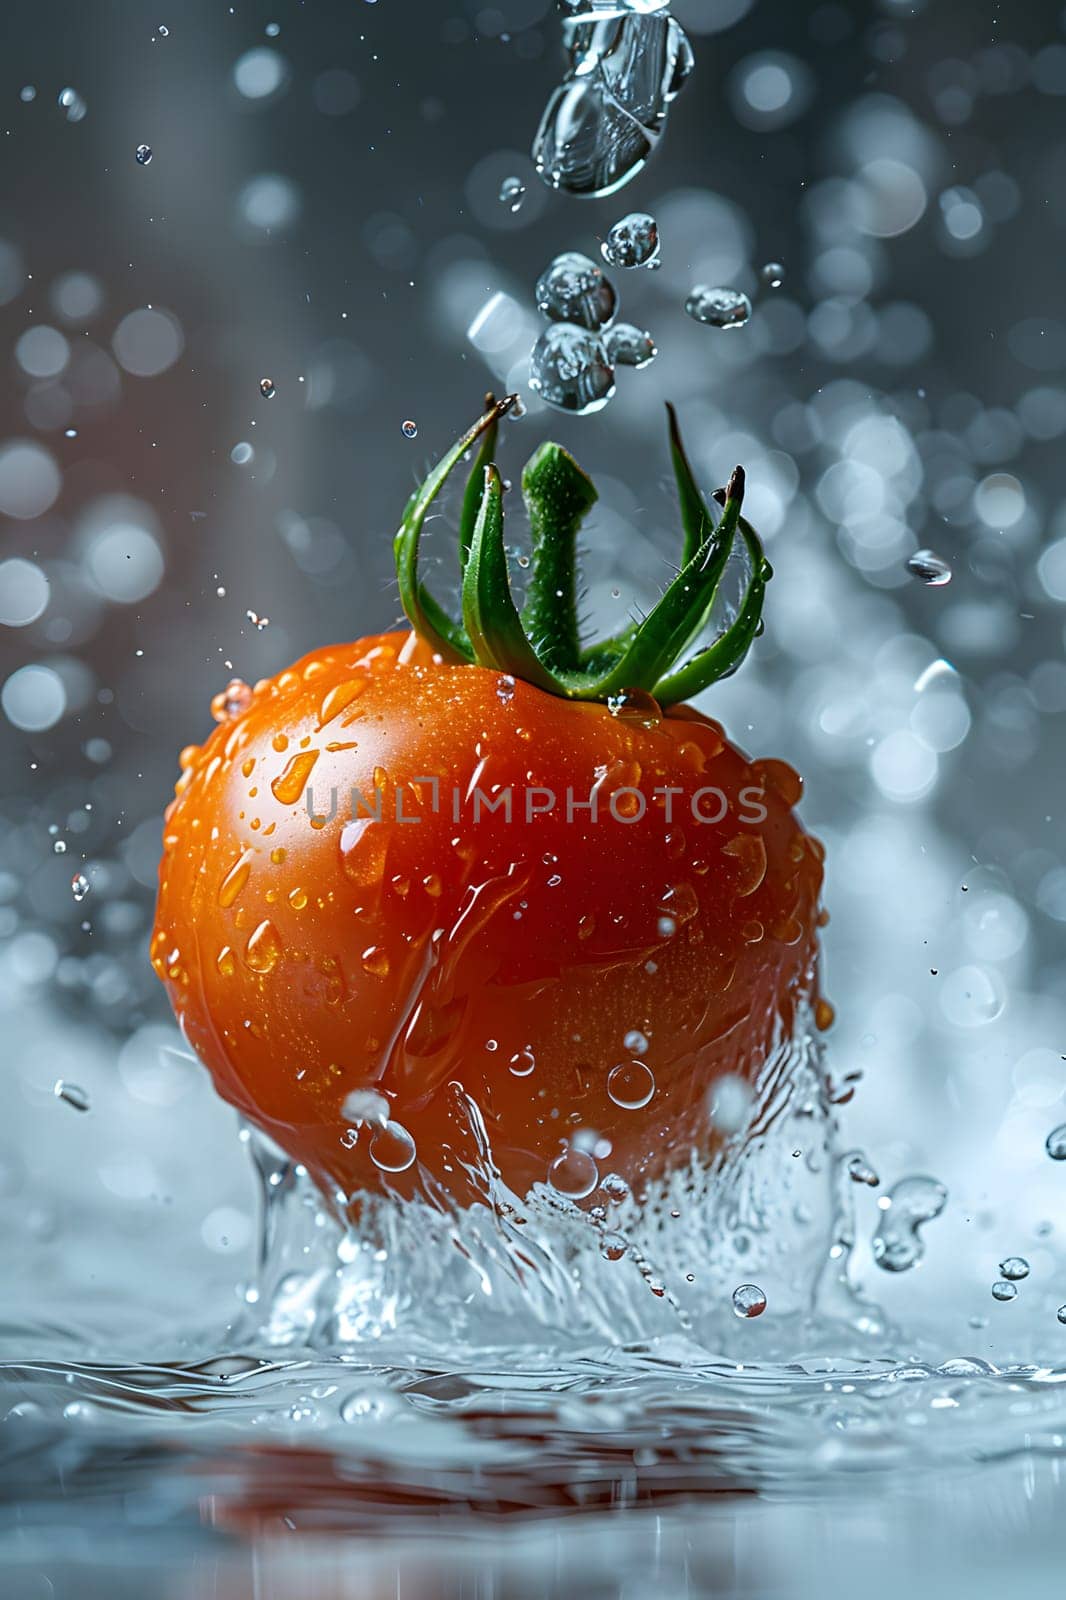 A seedless fruit, the tomato, is plunging into a liquid body of water. This superfood, from the plant family, is a versatile produce used in many natural foods